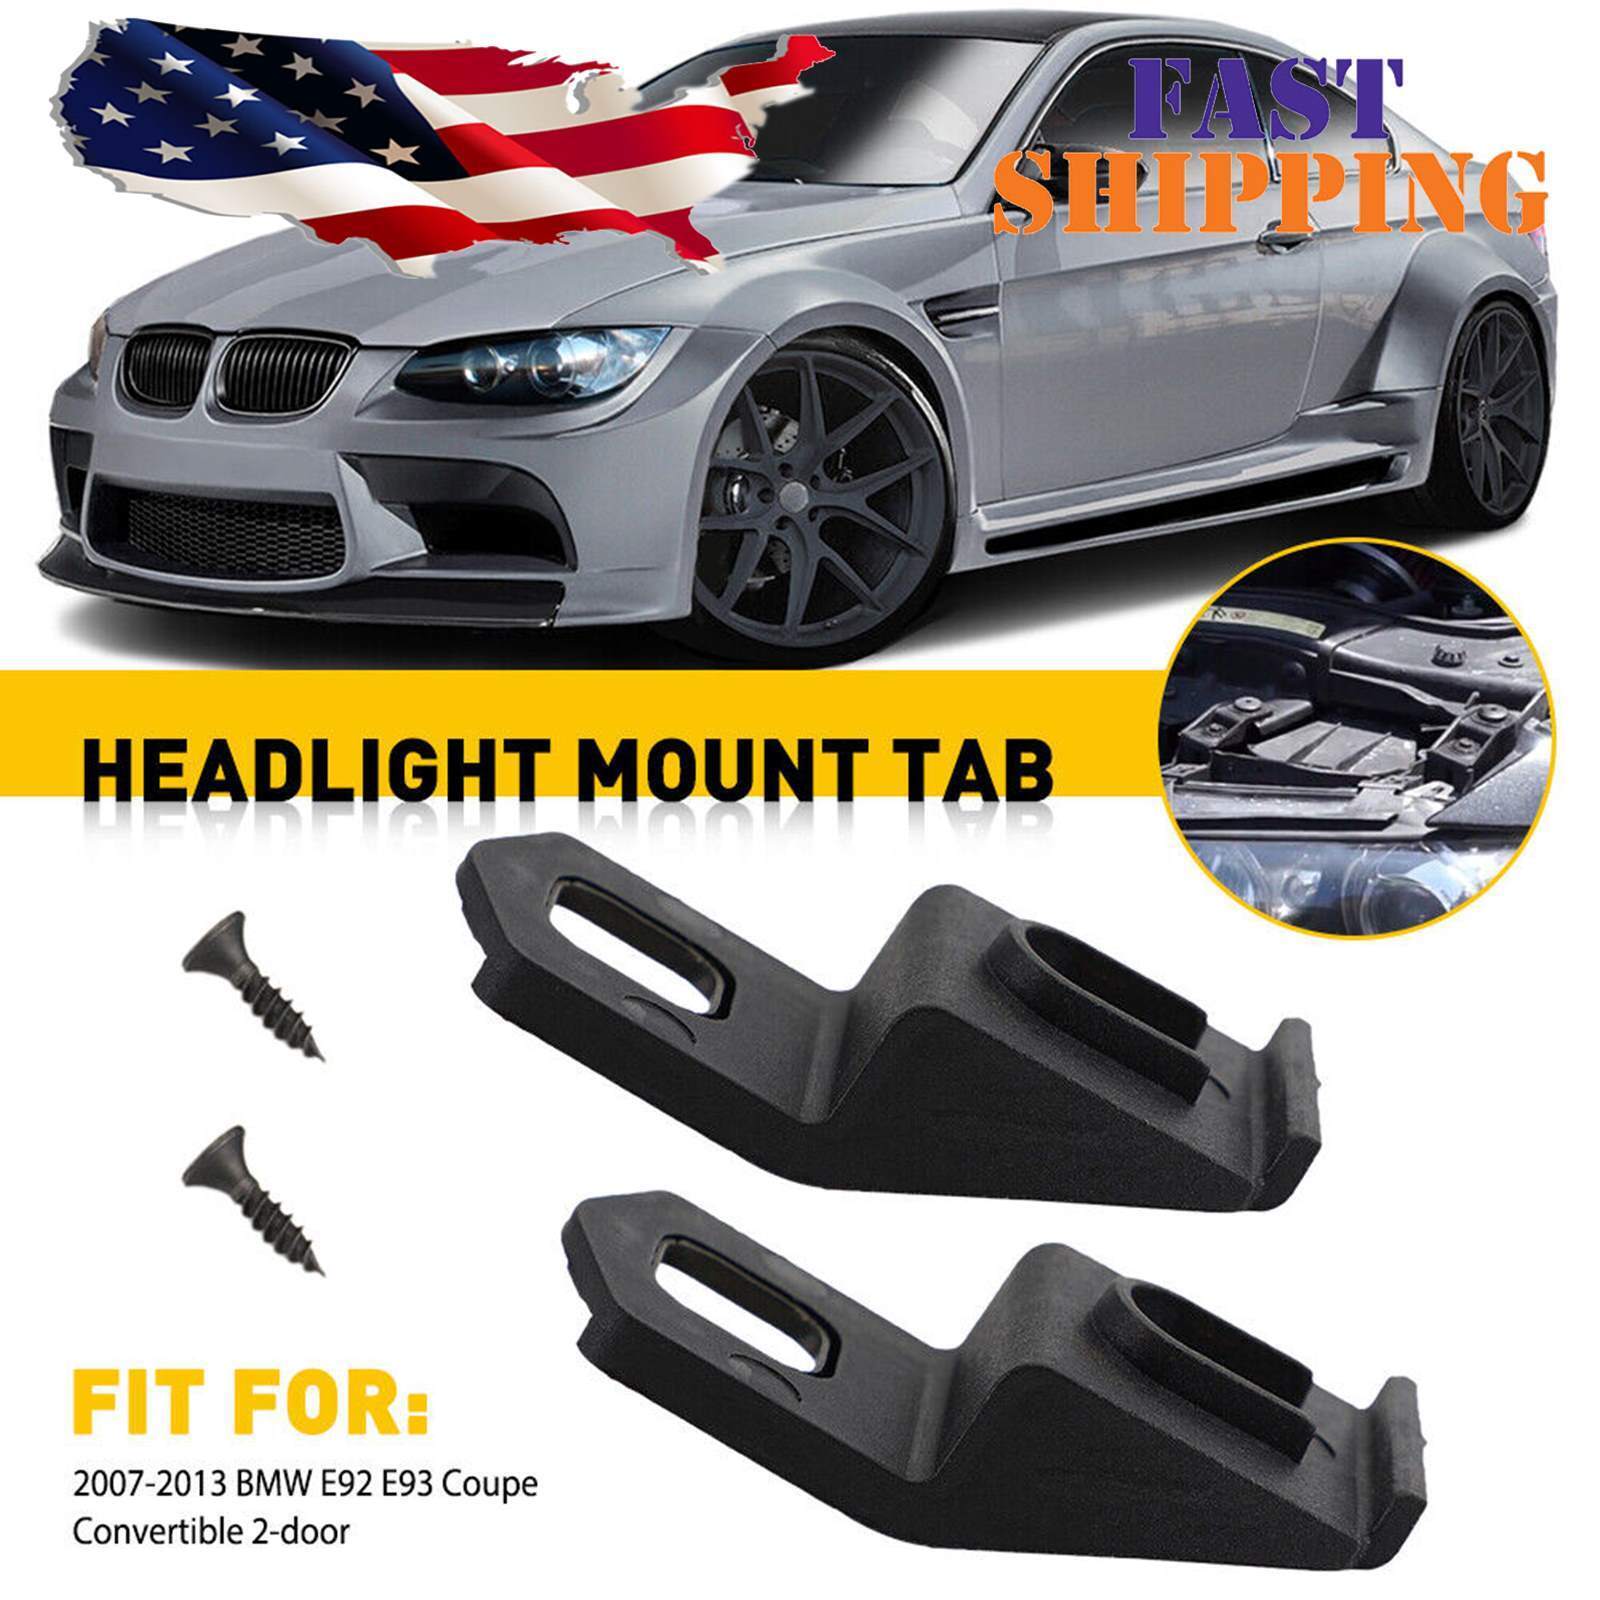 Fit For 2007-2013 BMW E92 E93 Coupe Convertible Headlight Mount Tab Repair Kit